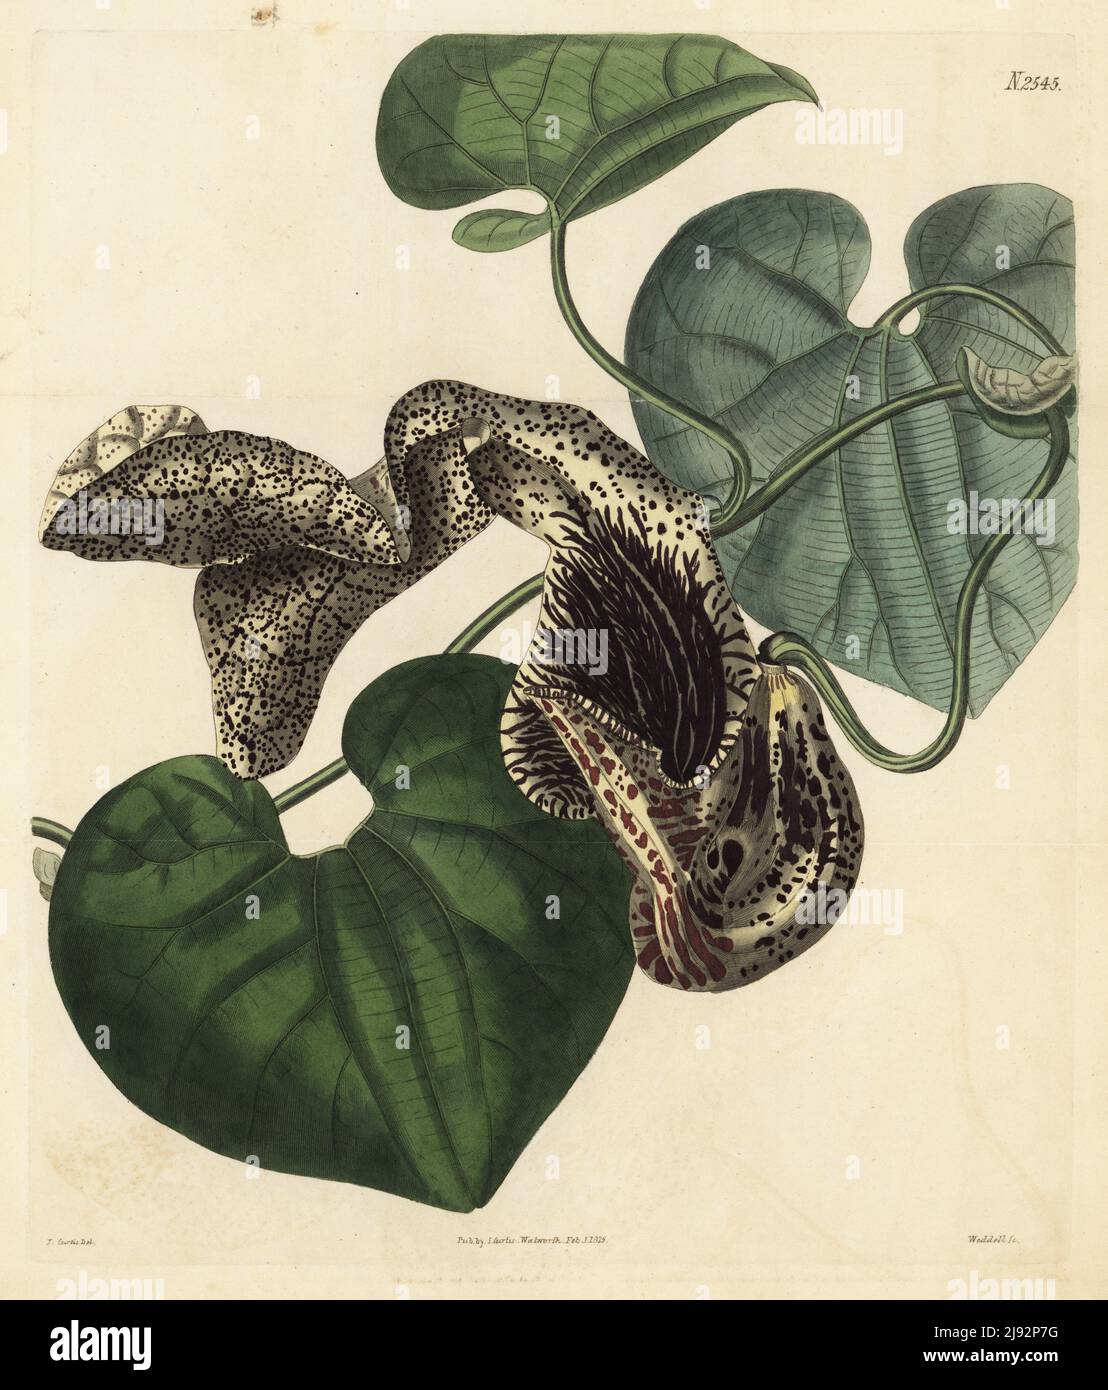 Aristolochia cymbifera. Marcgrave's birthwort, Aristolochia labiosa. Native of Brazil, introduced to Kew Gardens by the king's collectors Allan Cunningham and James Bowie. Drawn at Count de Vandes' gardens at Bayswater. Handcoloured copperplate engraving by Weddell after a botanical illustration by John Curtis from William Curtis's Botanical Magazine, Samuel Curtis, London, 1825. Stock Photo